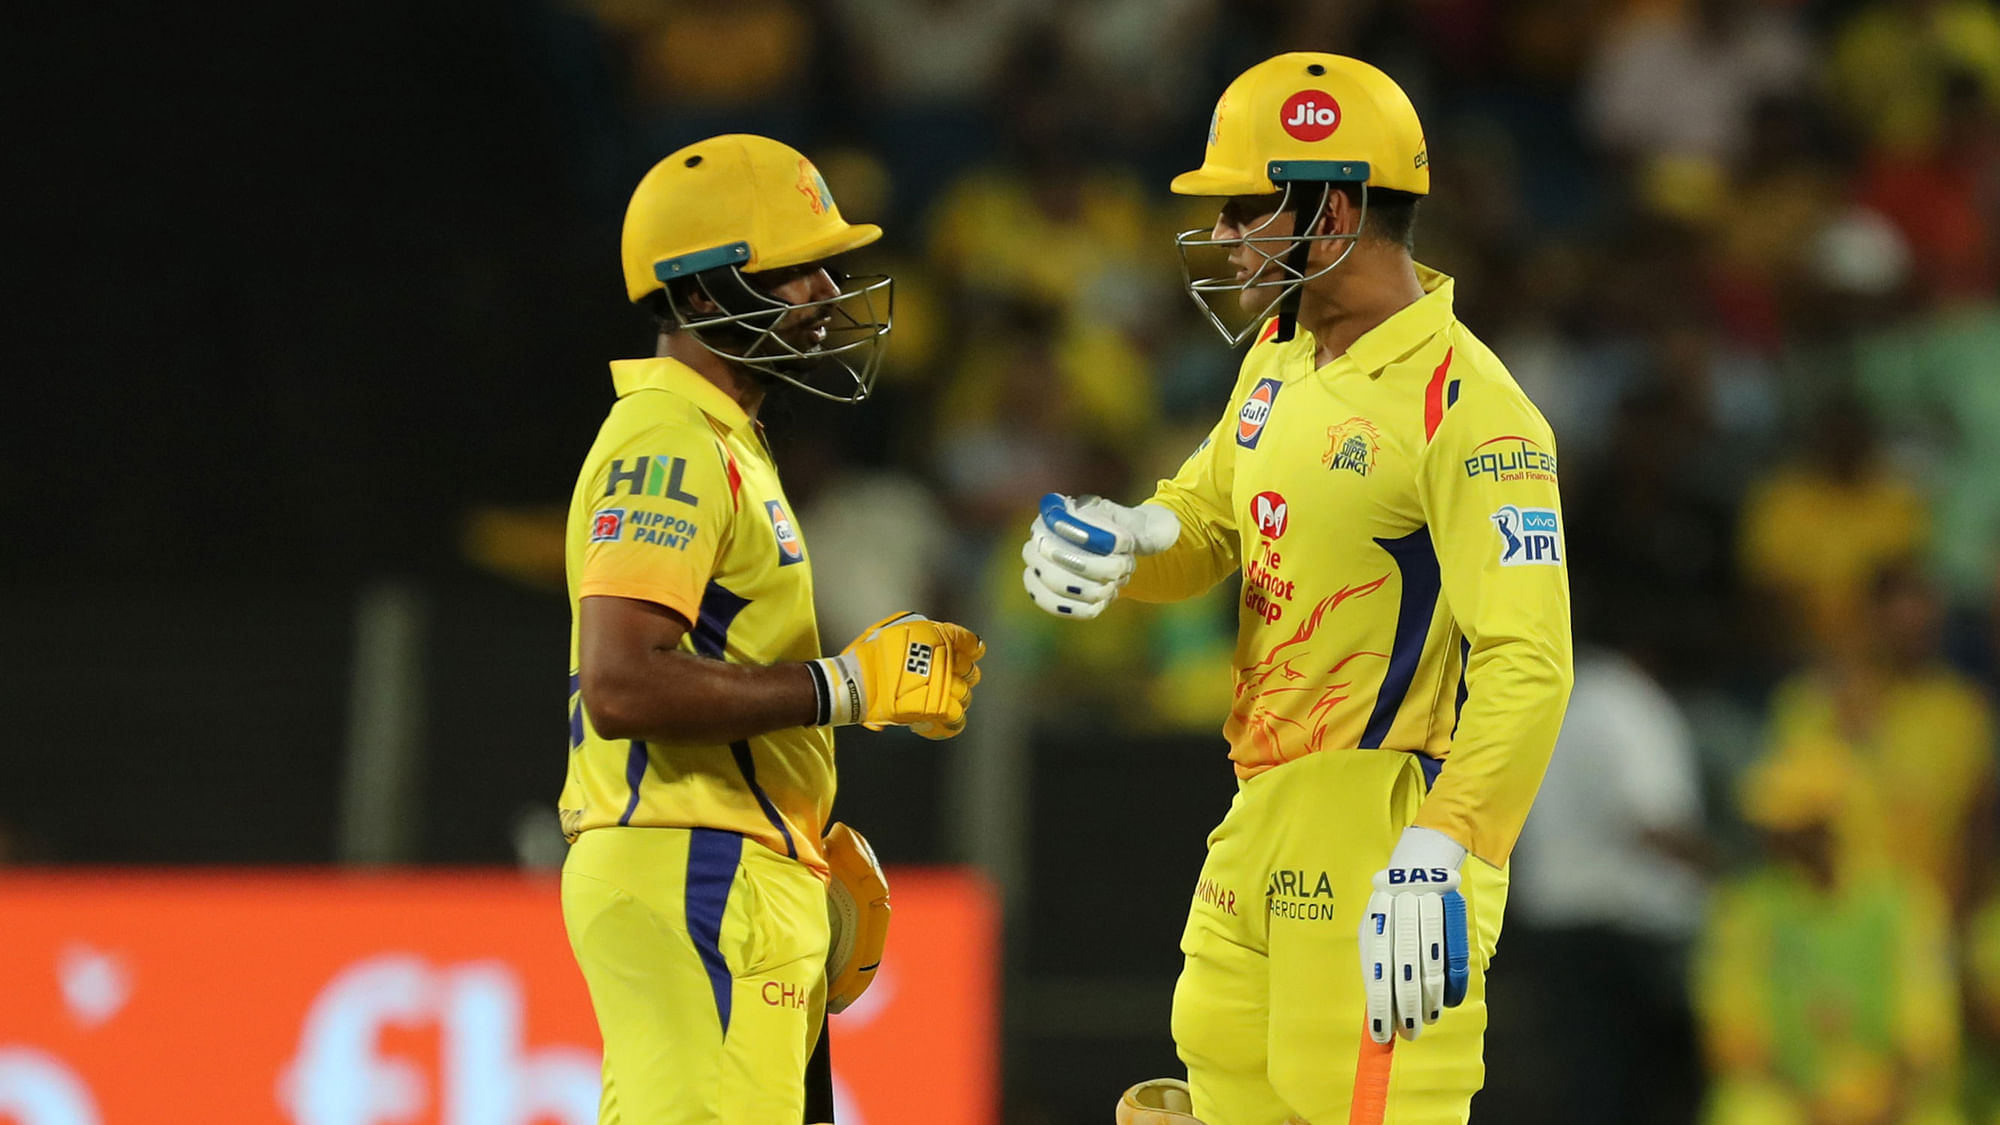 Ambati Rayudu and MS Dhoni share a moment during the match between Chennai Super Kings and Sunrisers Hyderabad.